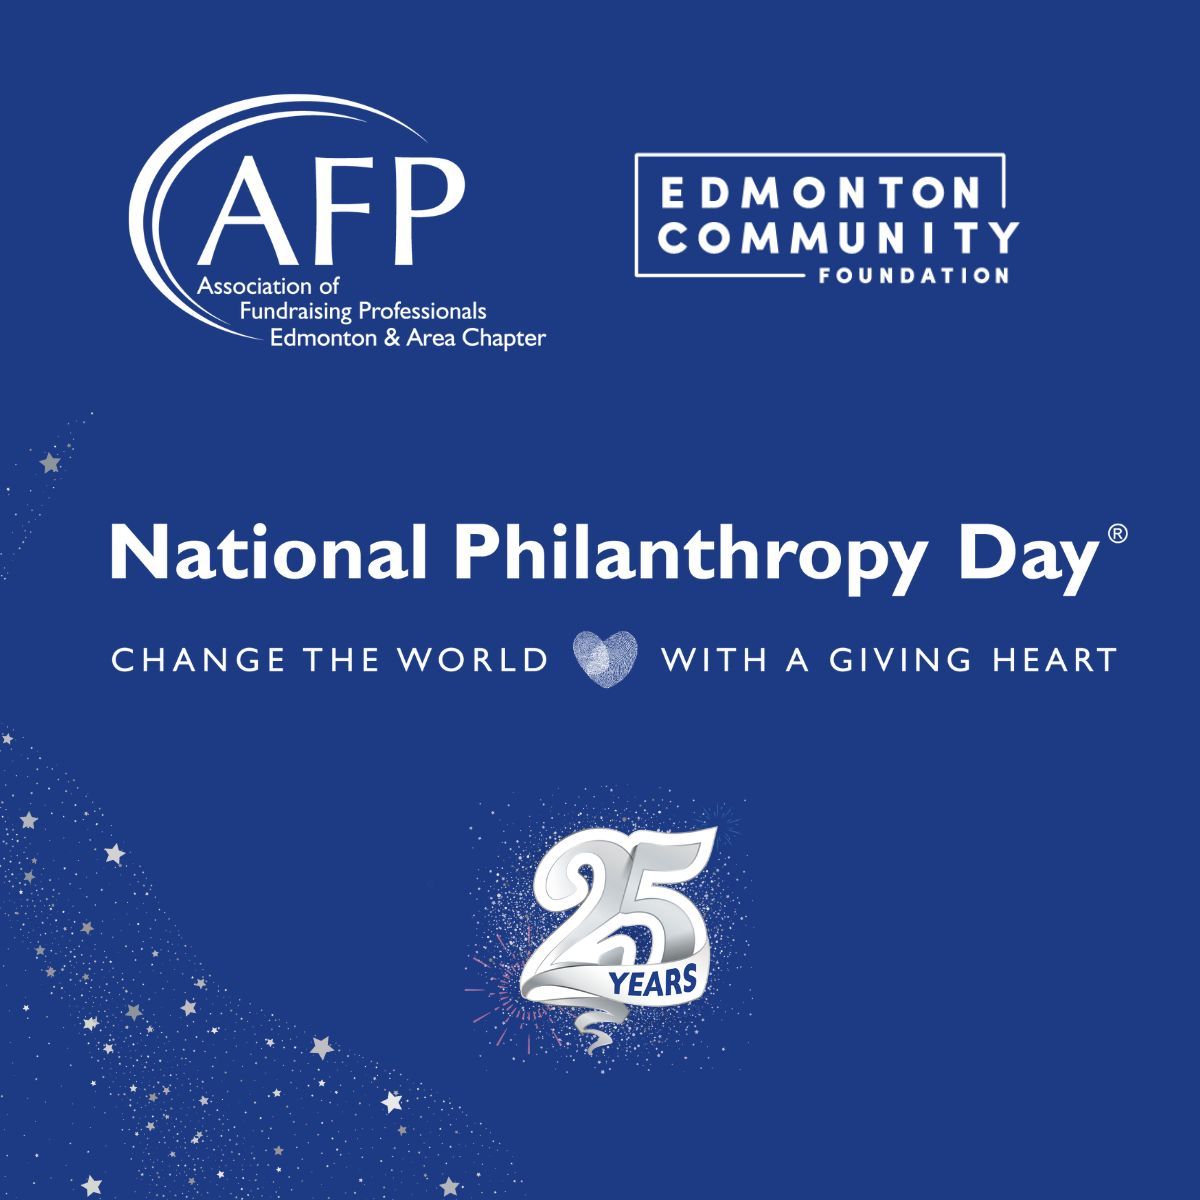 There's just over a month until National Philanthropy Day! Looking for tickets to join us at the in-person event on November 15? You can purchase individual tickets and tables, here: buff.ly/46AXjL9 Grab them soon because ticket sales end October 20!